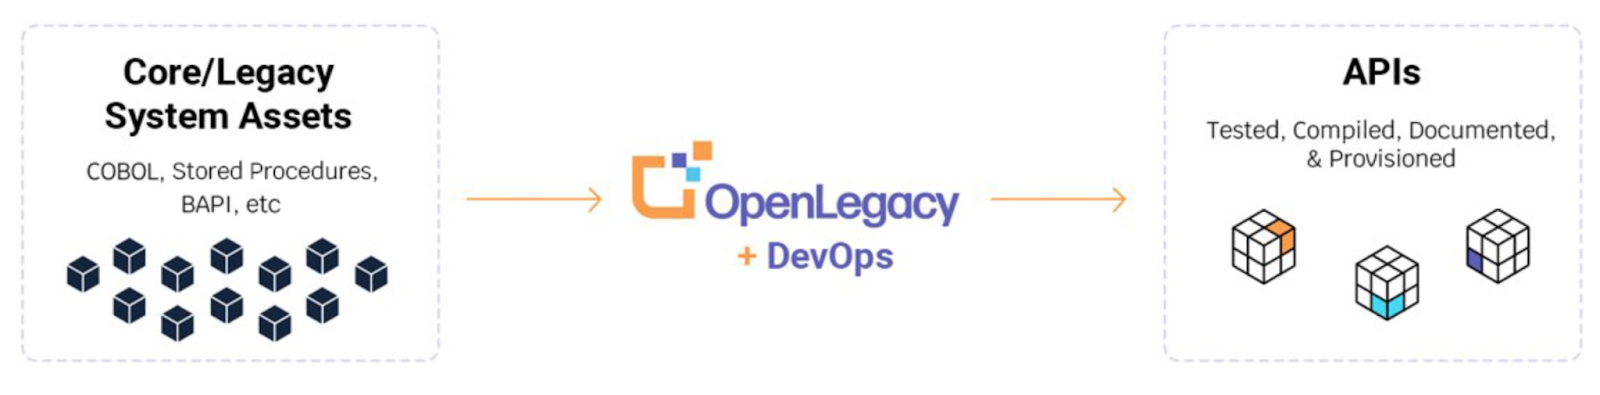 OpenLegacy and DevOps graphic